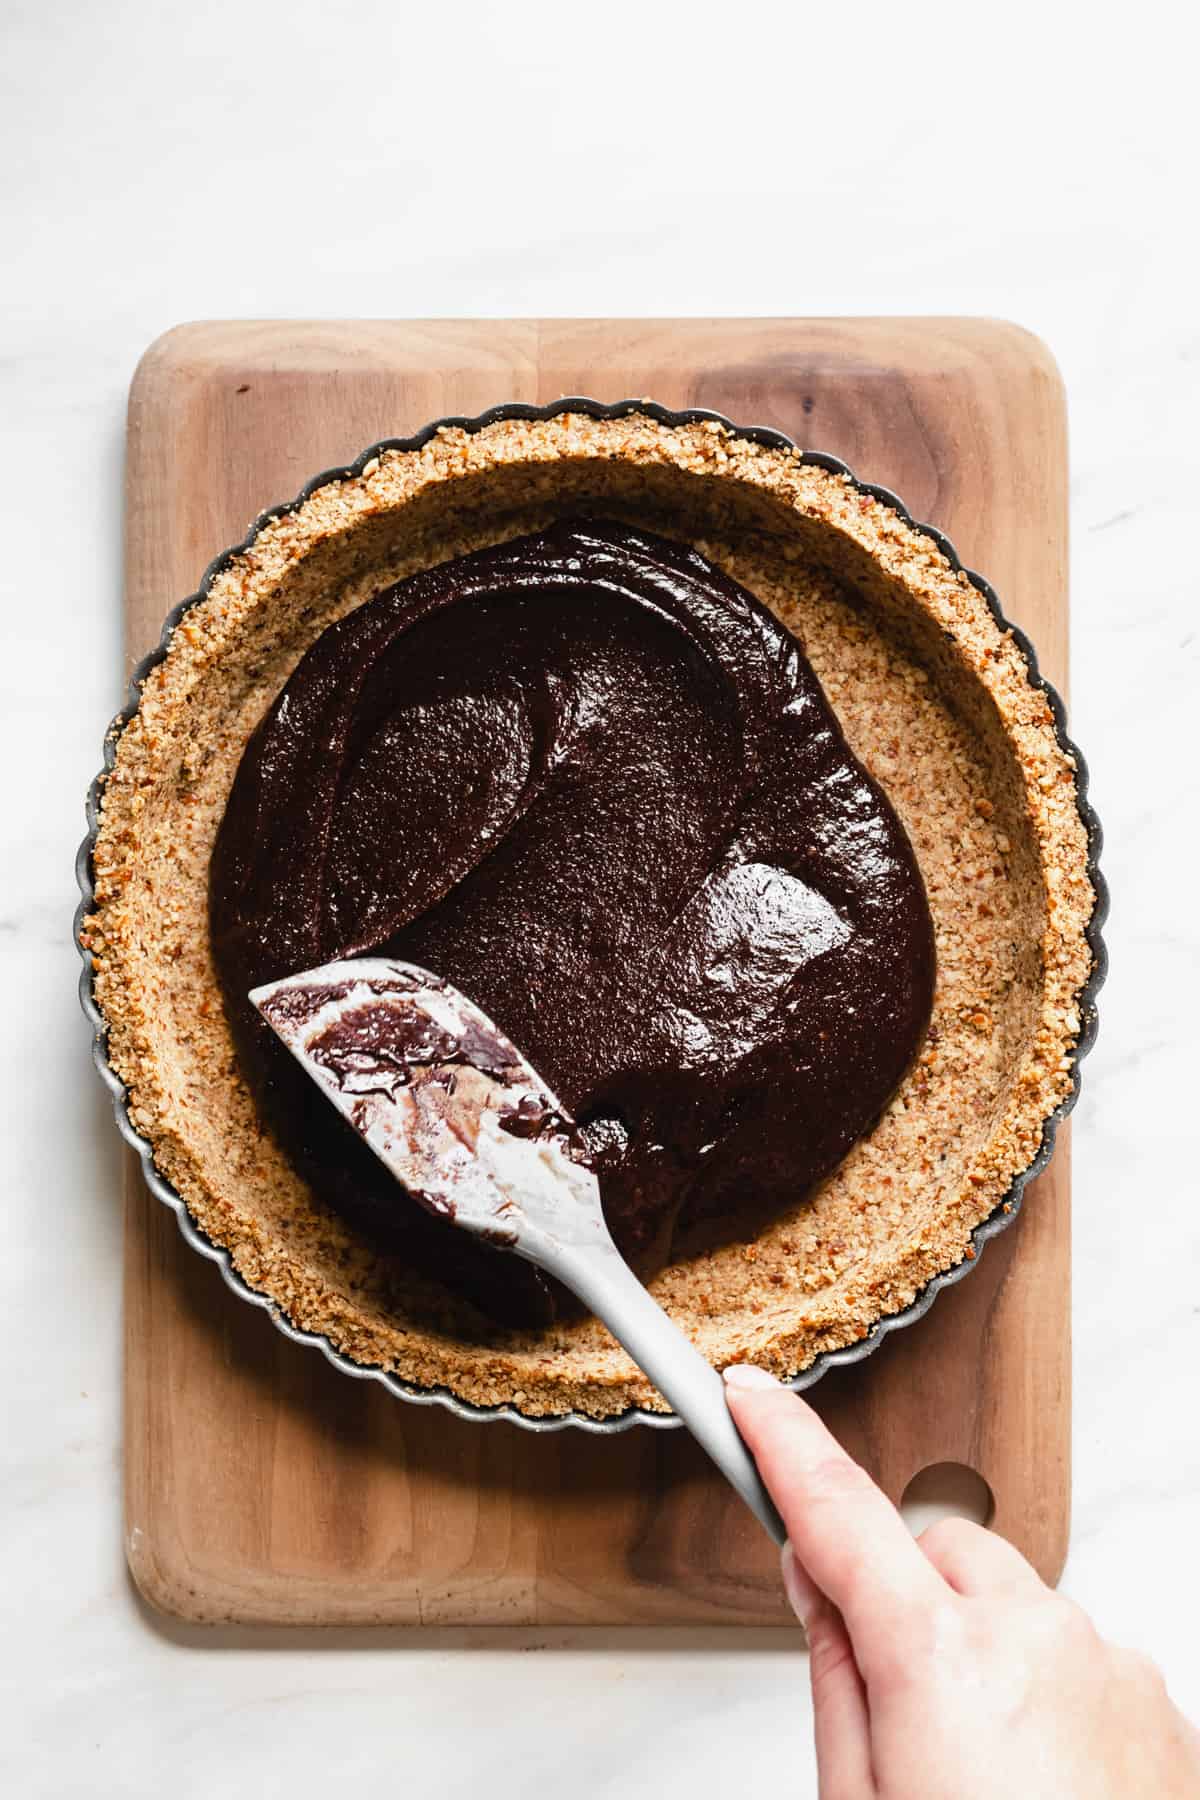 Brownie batter being spread to meet the edges of the crust